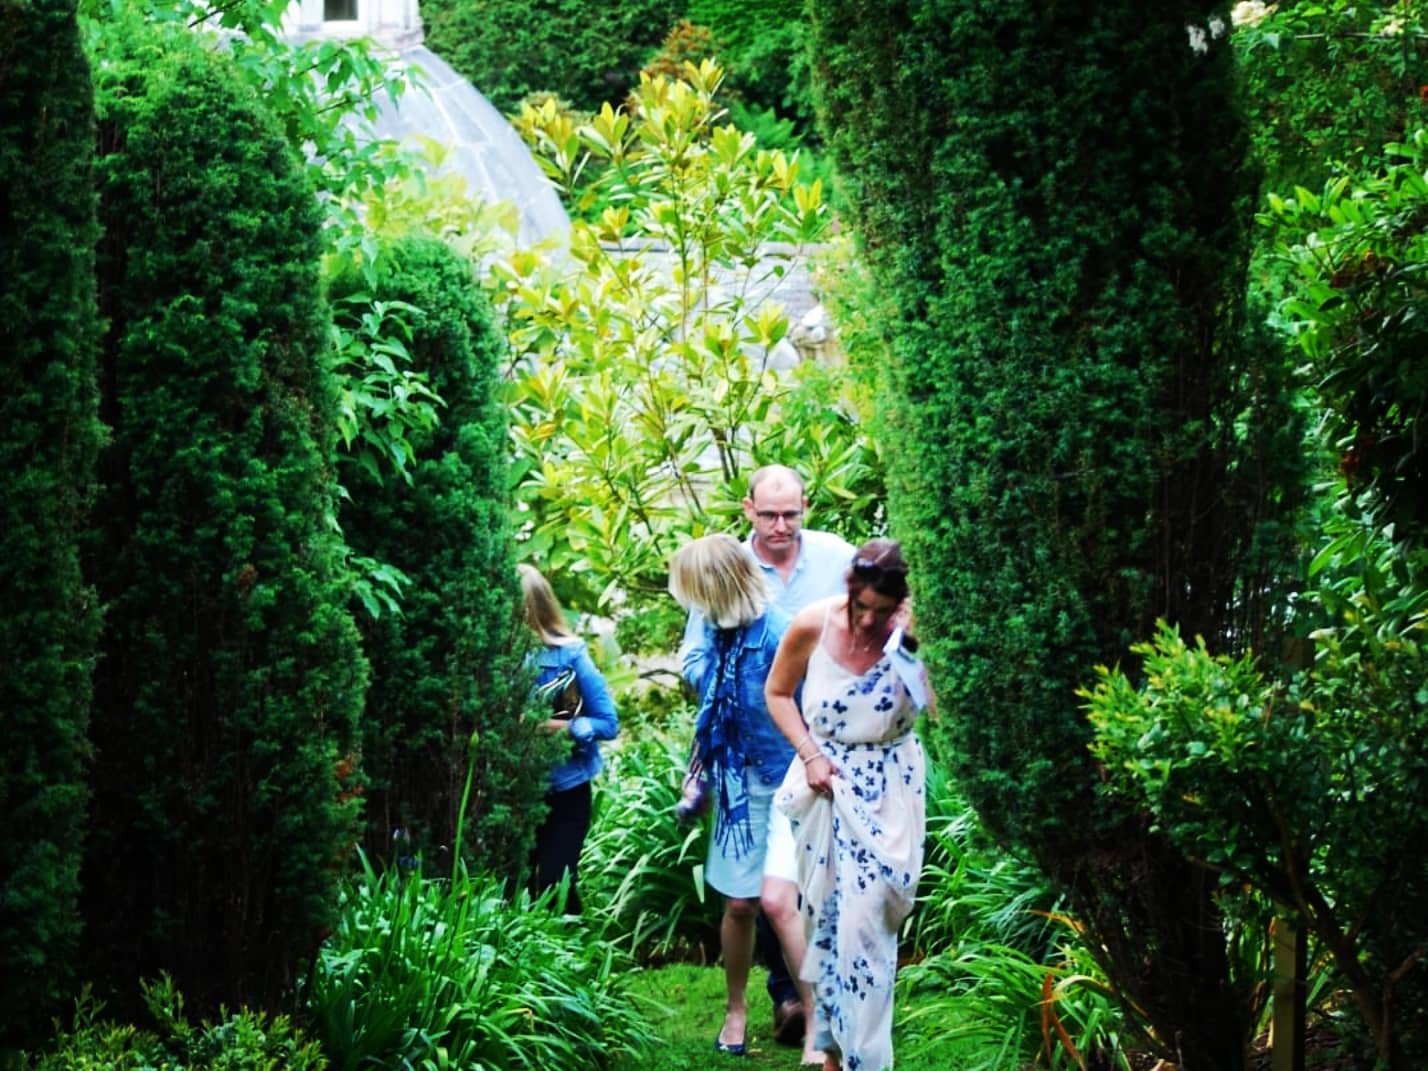 A group of people walking through a garden with large bushes either side